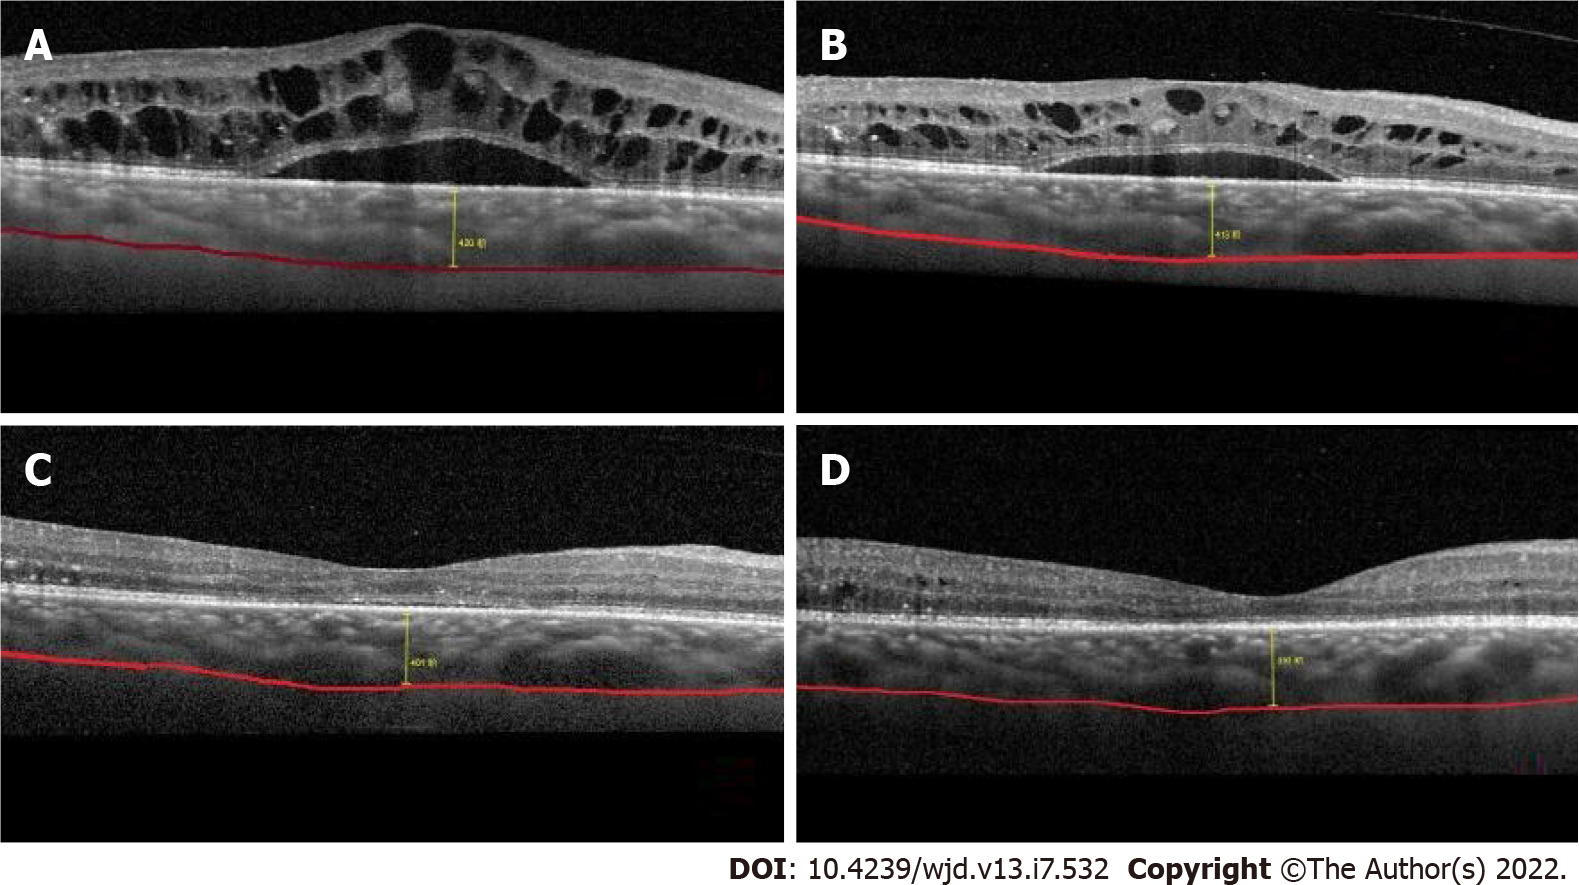 Efficacy and mechanism of anti-vascular endothelial growth factor drugs for diabetic macular edema patients